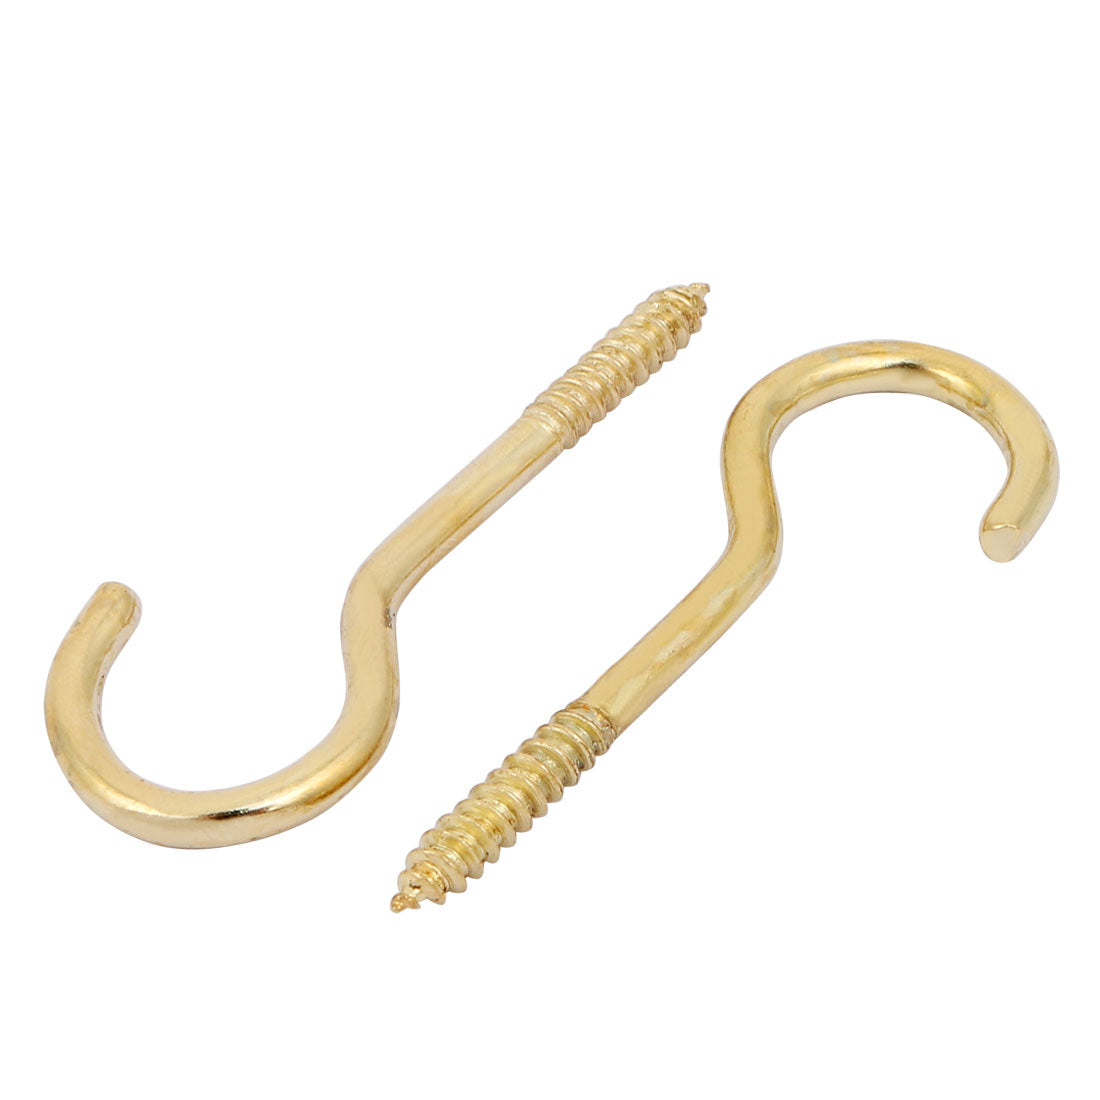 uxcell Uxcell 3.9mm Dia Thread 55mm Length Iron Brass Plated Self-Tapping Screw Hook 50pcs